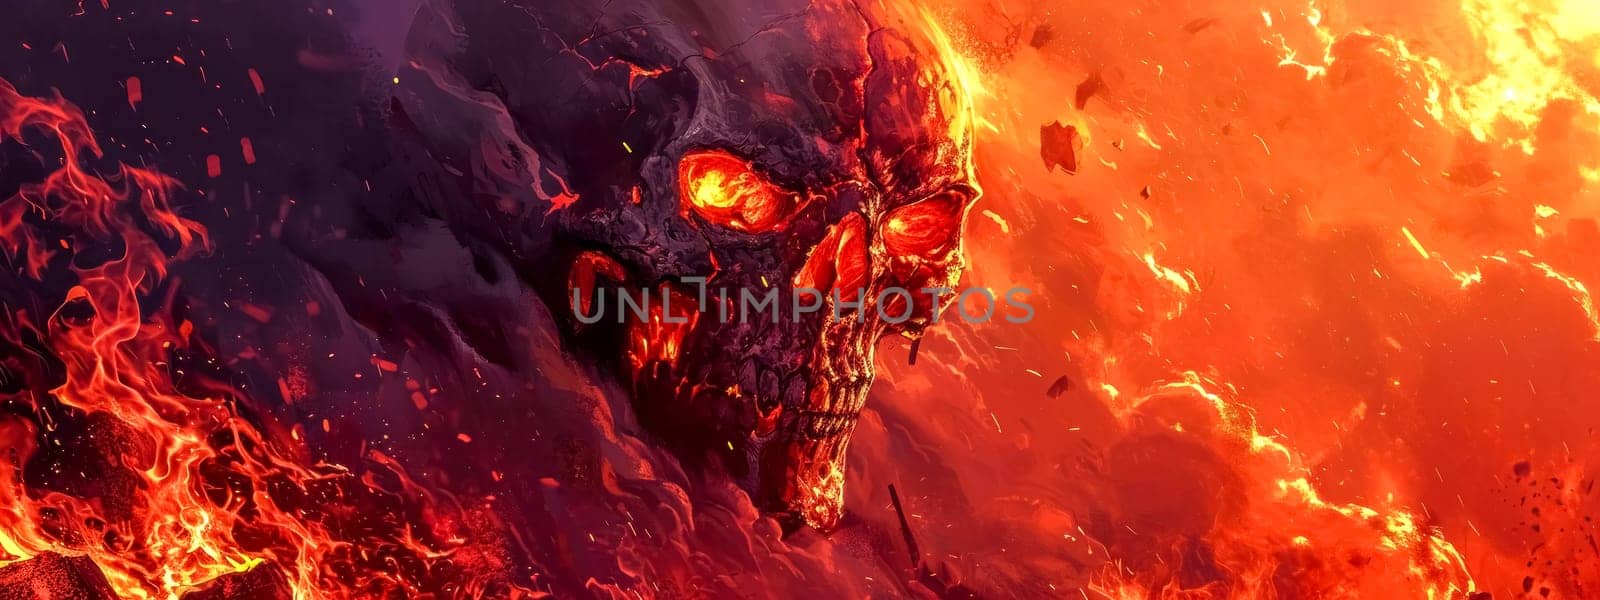 The image depicts a fiery, demonic skull submerged in flames, with a menacing gaze and a molten texture, suitable for horror or fantasy-themed content. by Edophoto